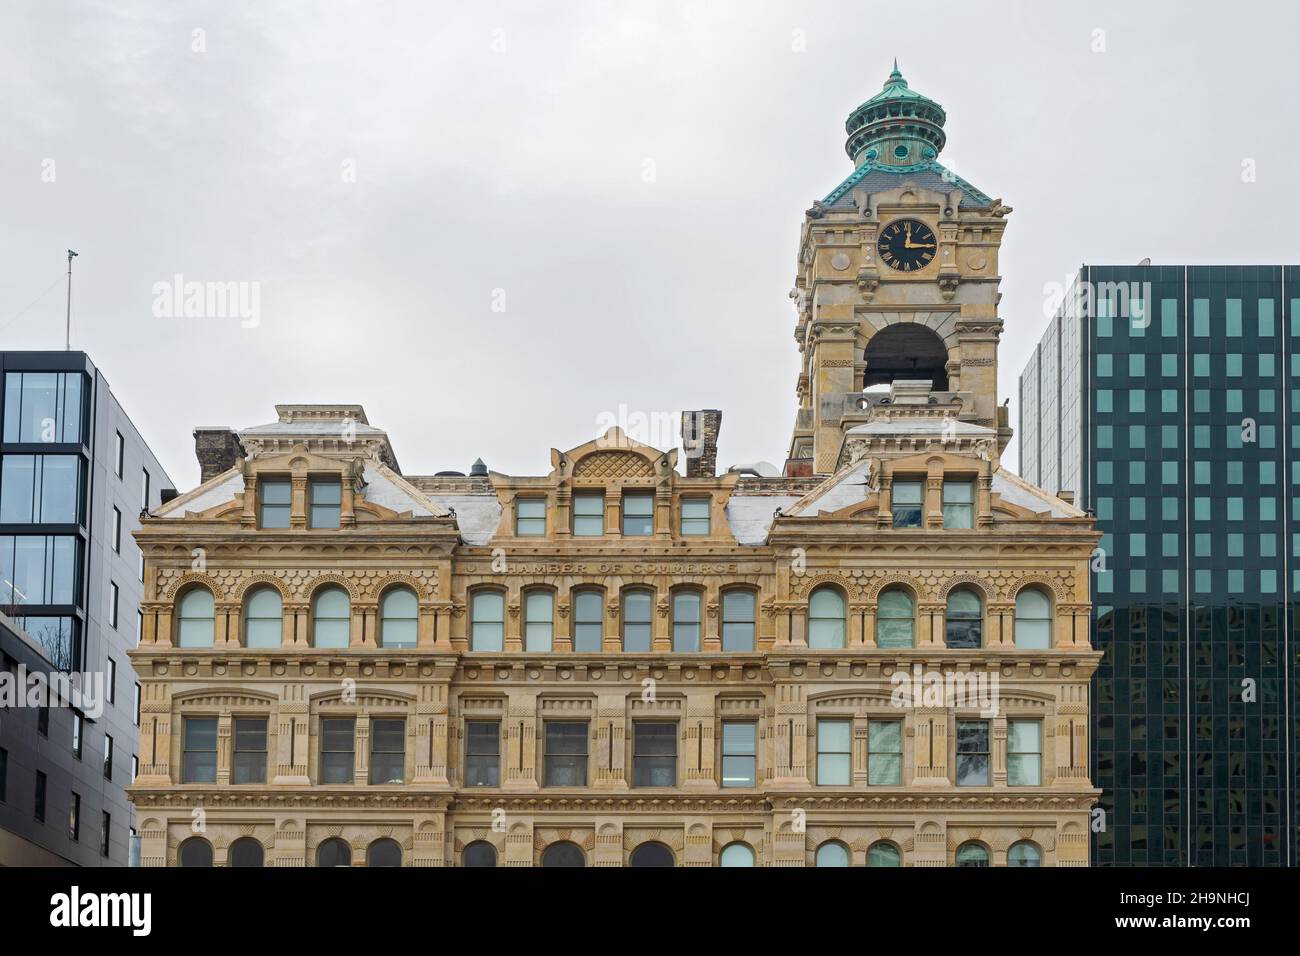 historic building former chamber of commerce facade and tower of victorian style architecture in downtown milwaukee Stock Photo